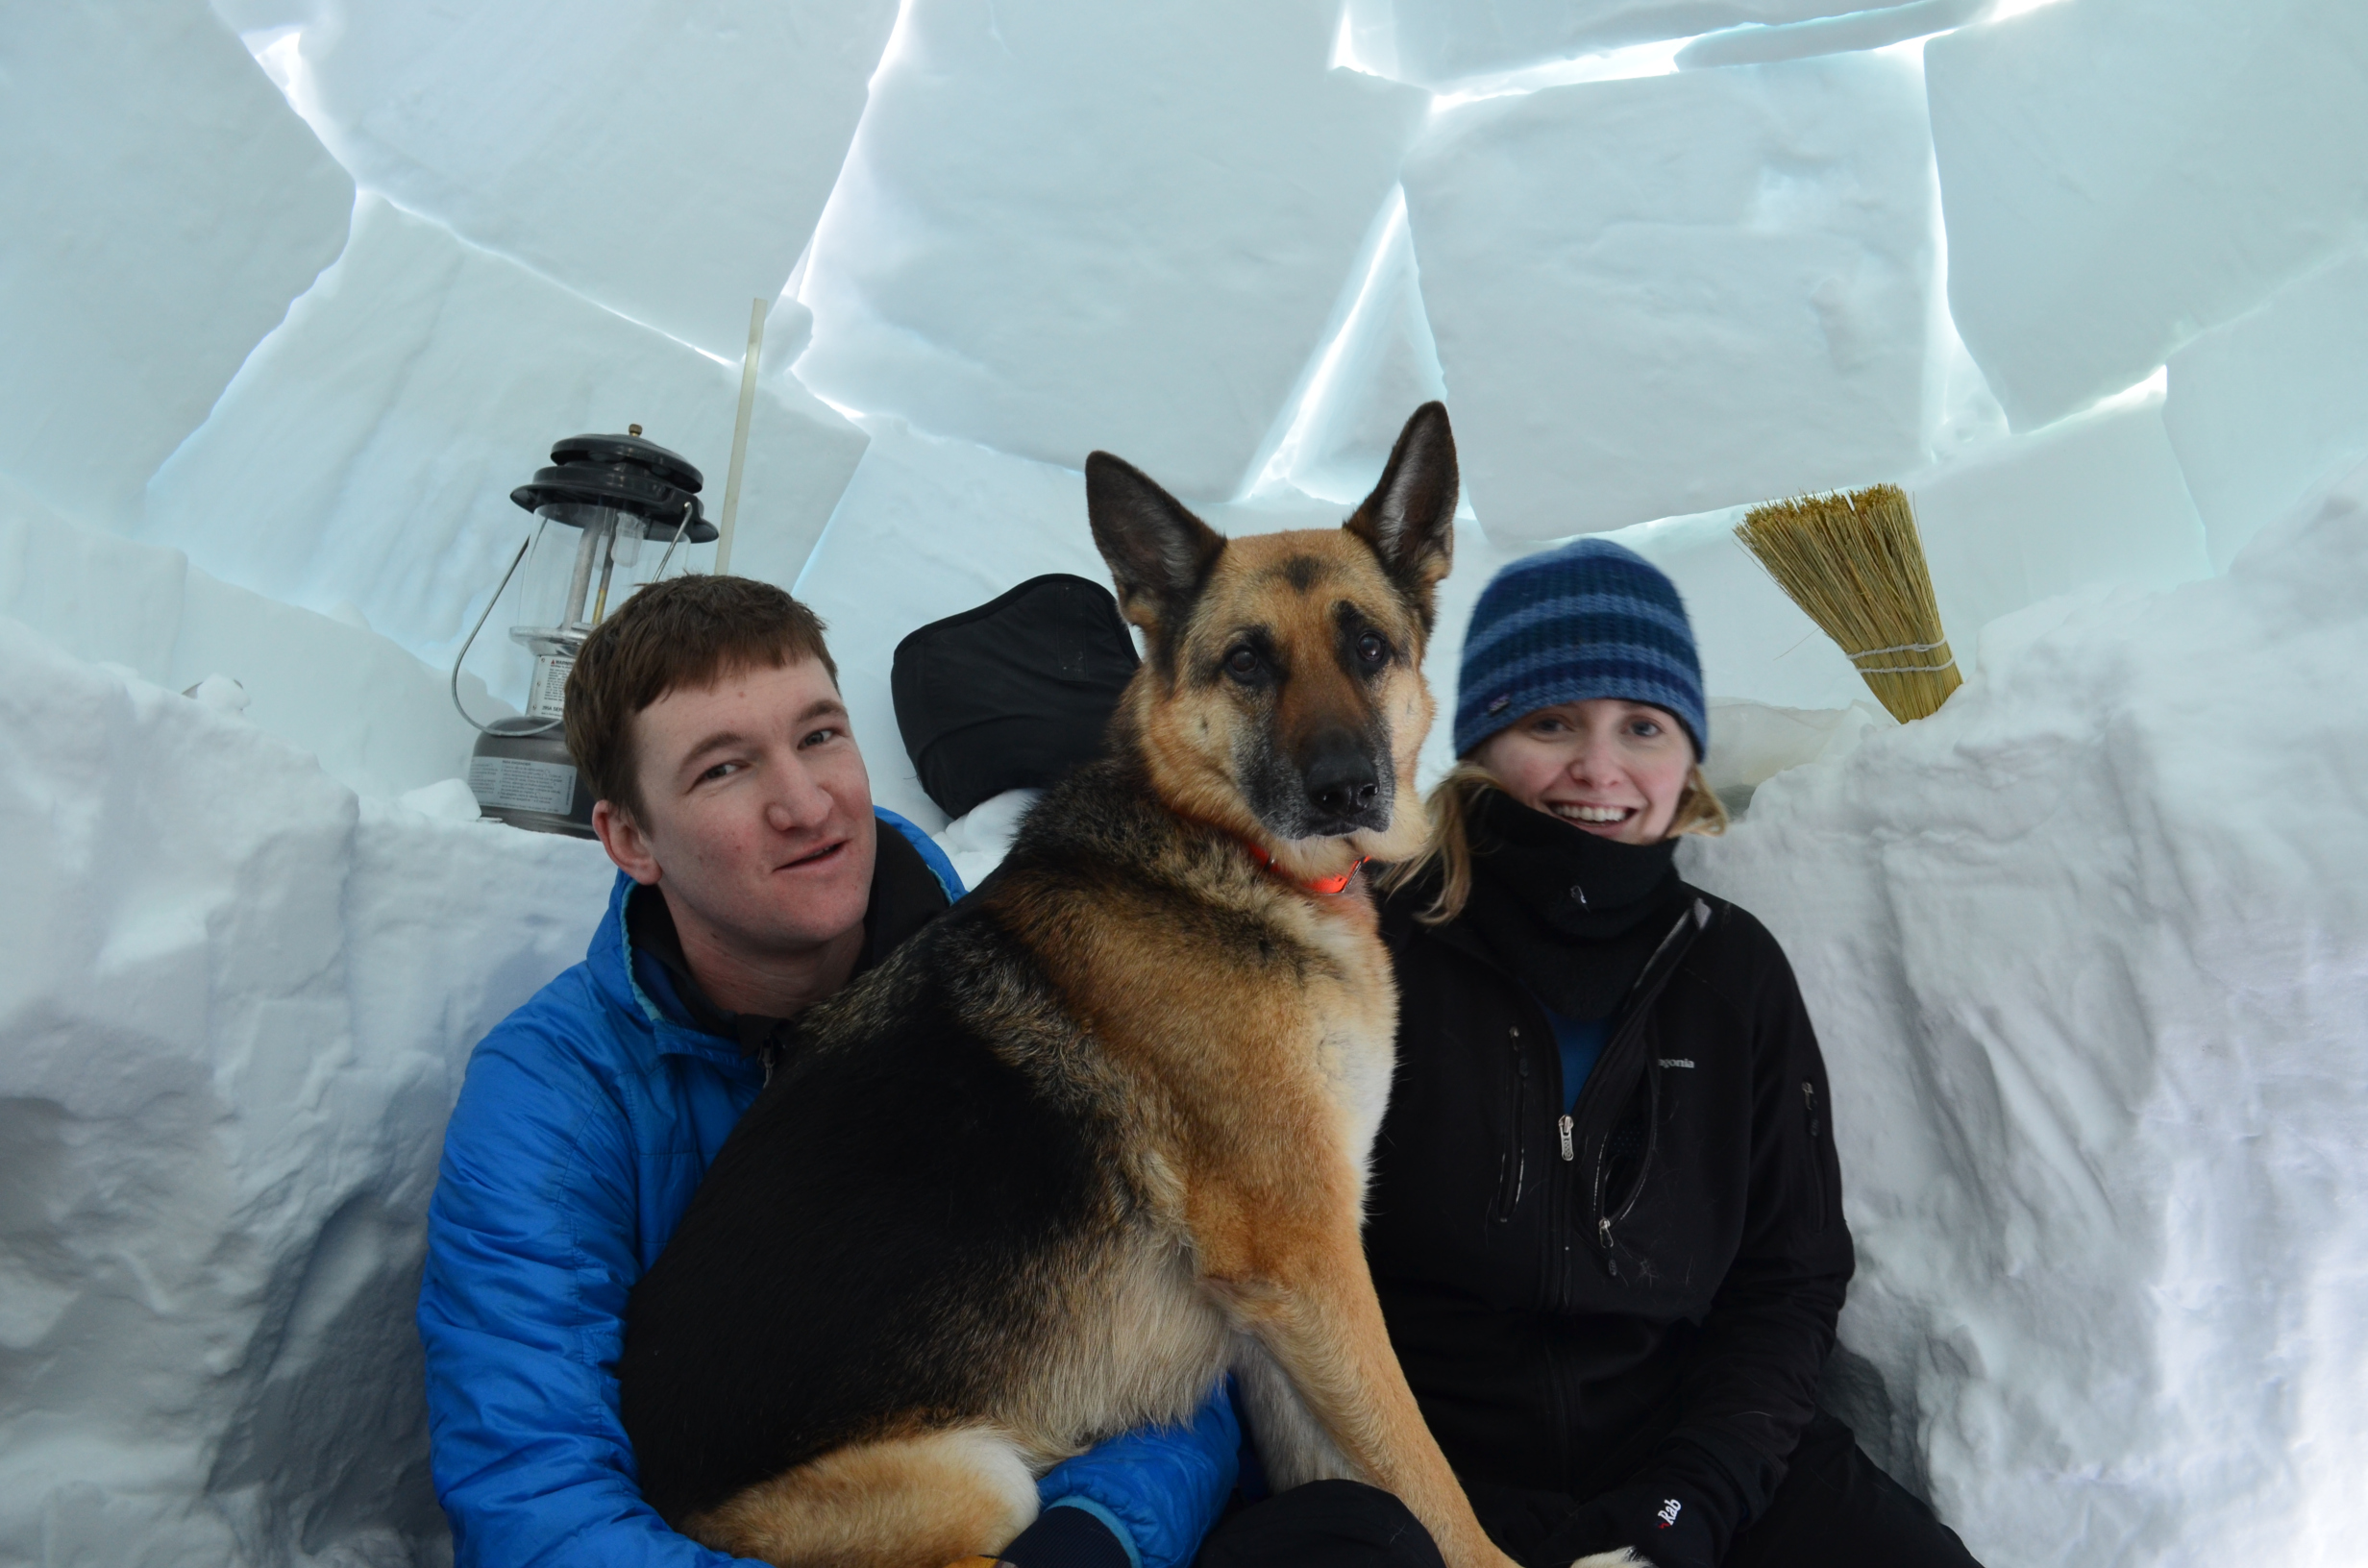 2 visitors and their dog, inside the igloo.